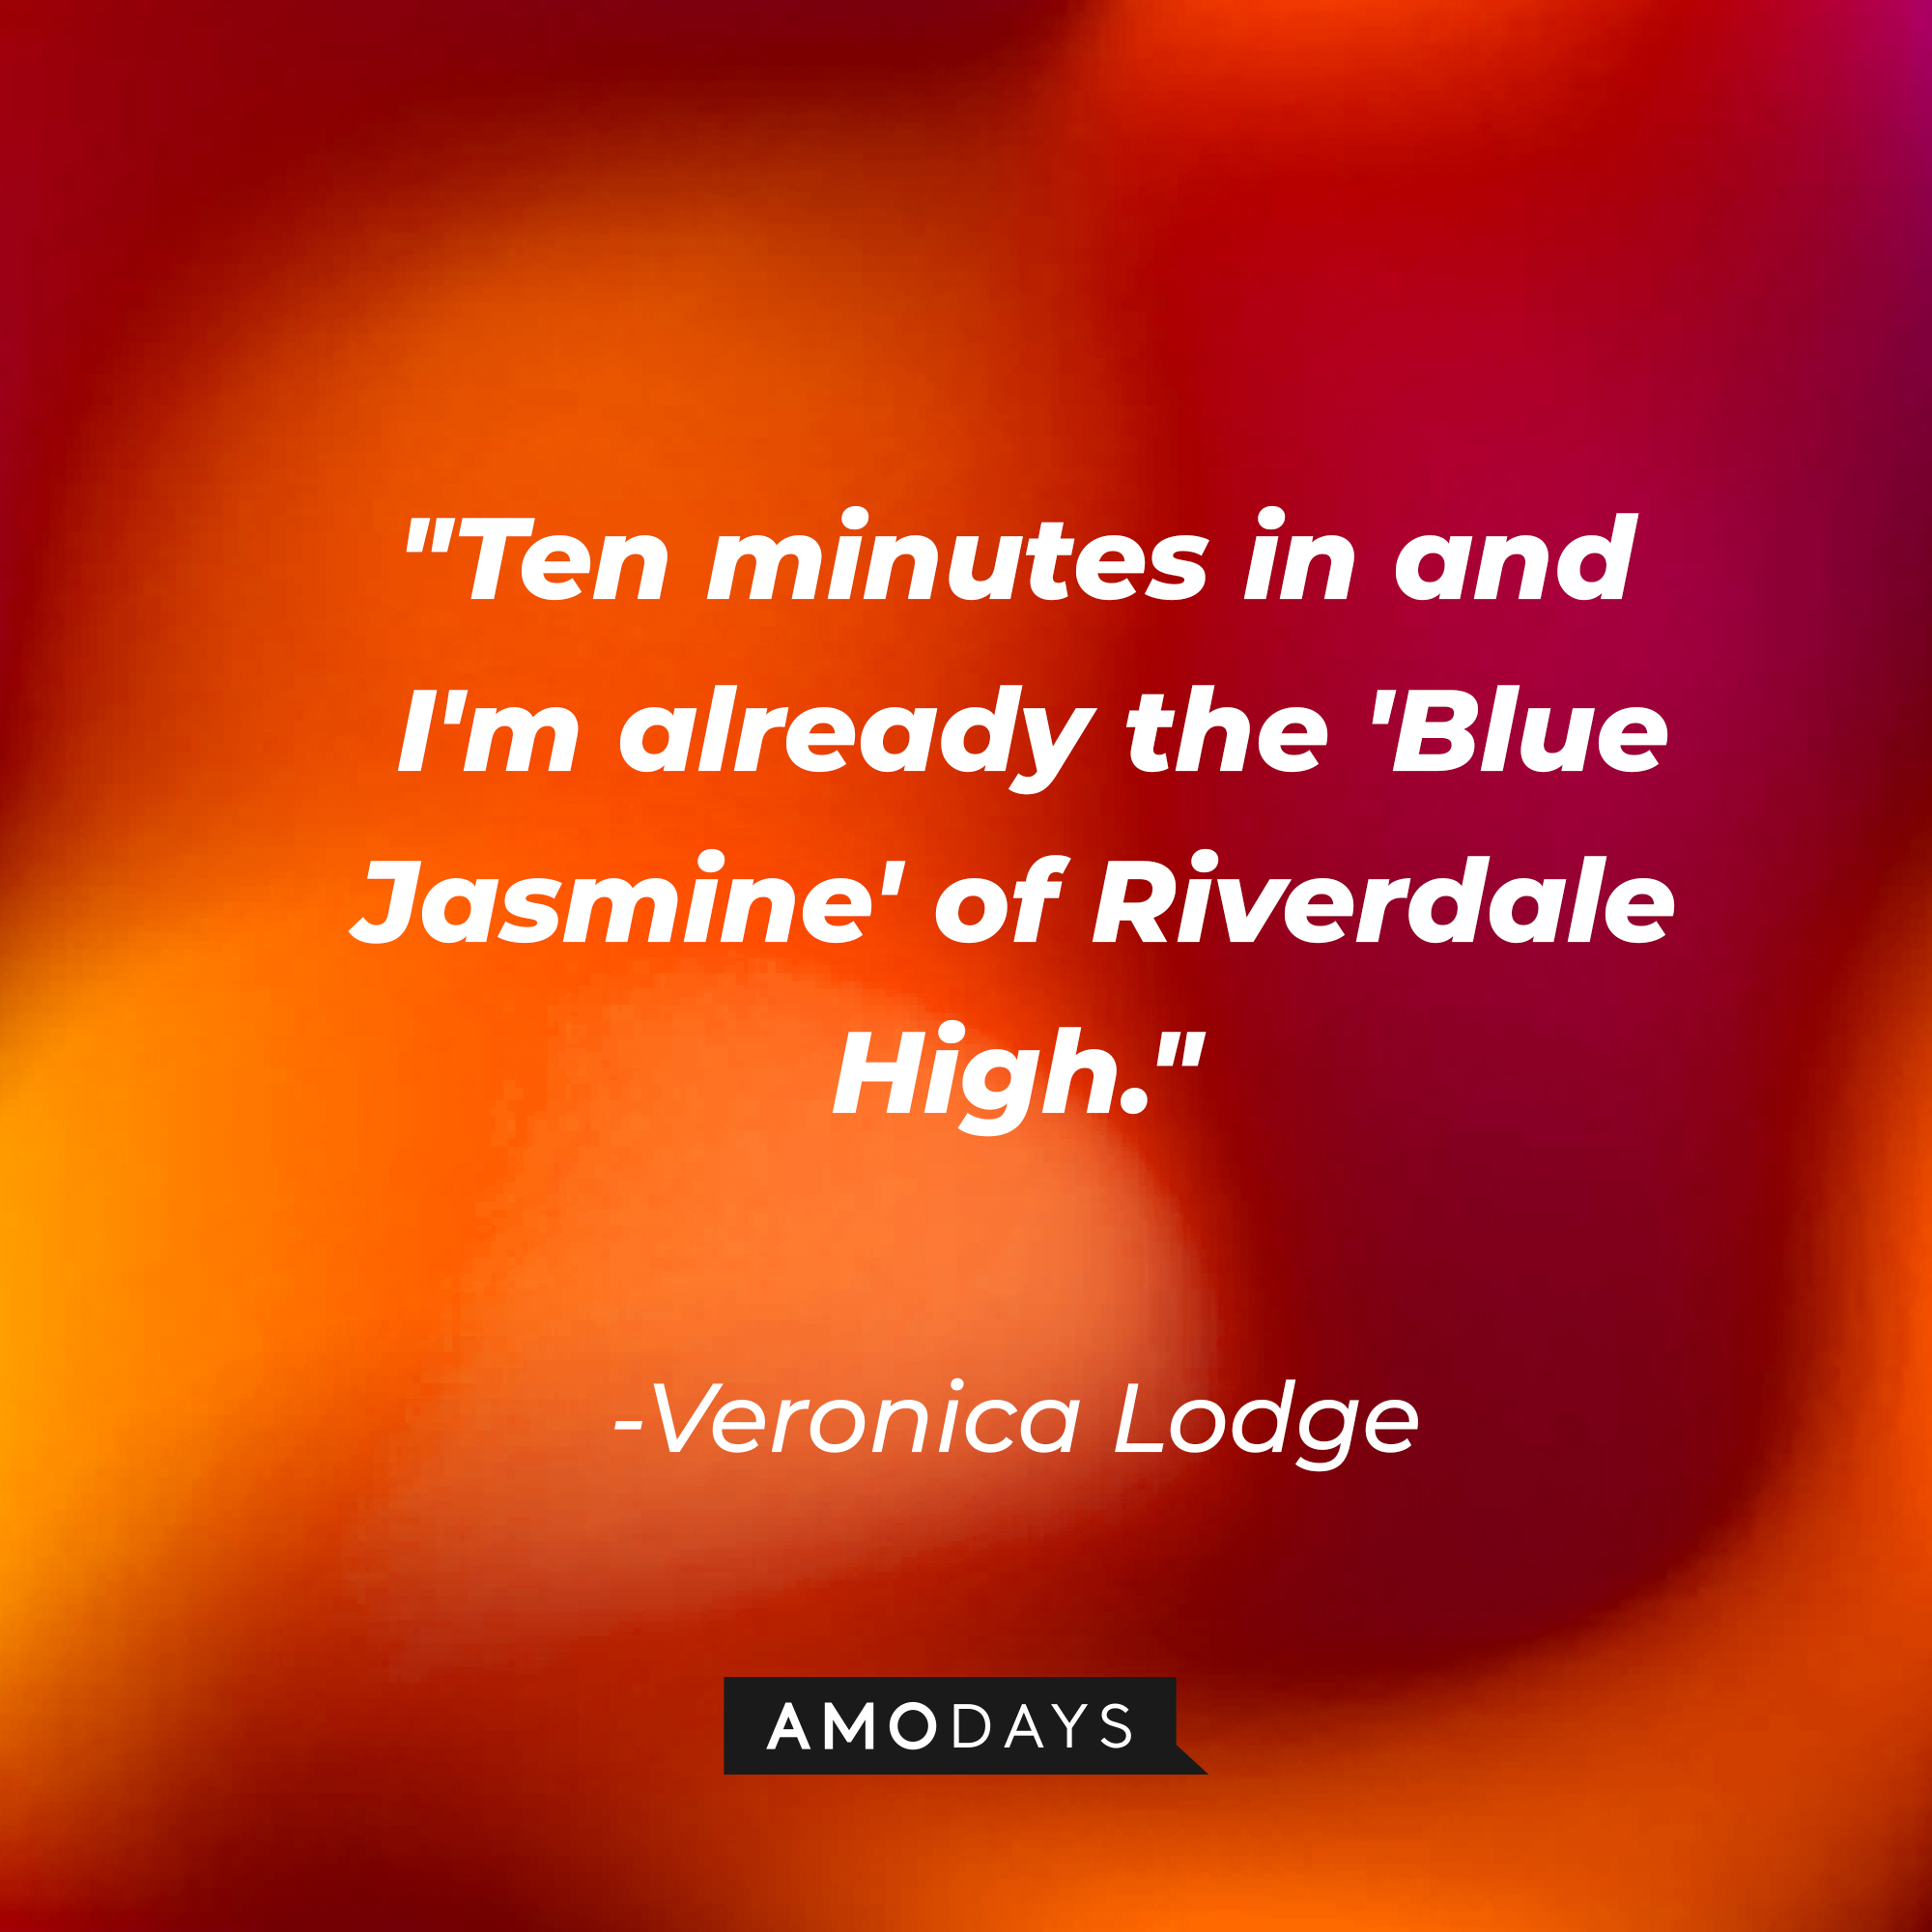 Veronica Lodge's quote: "Ten minutes in and I'm already the 'Blue Jasmine' of Riverdale High." | Source: AmoDays